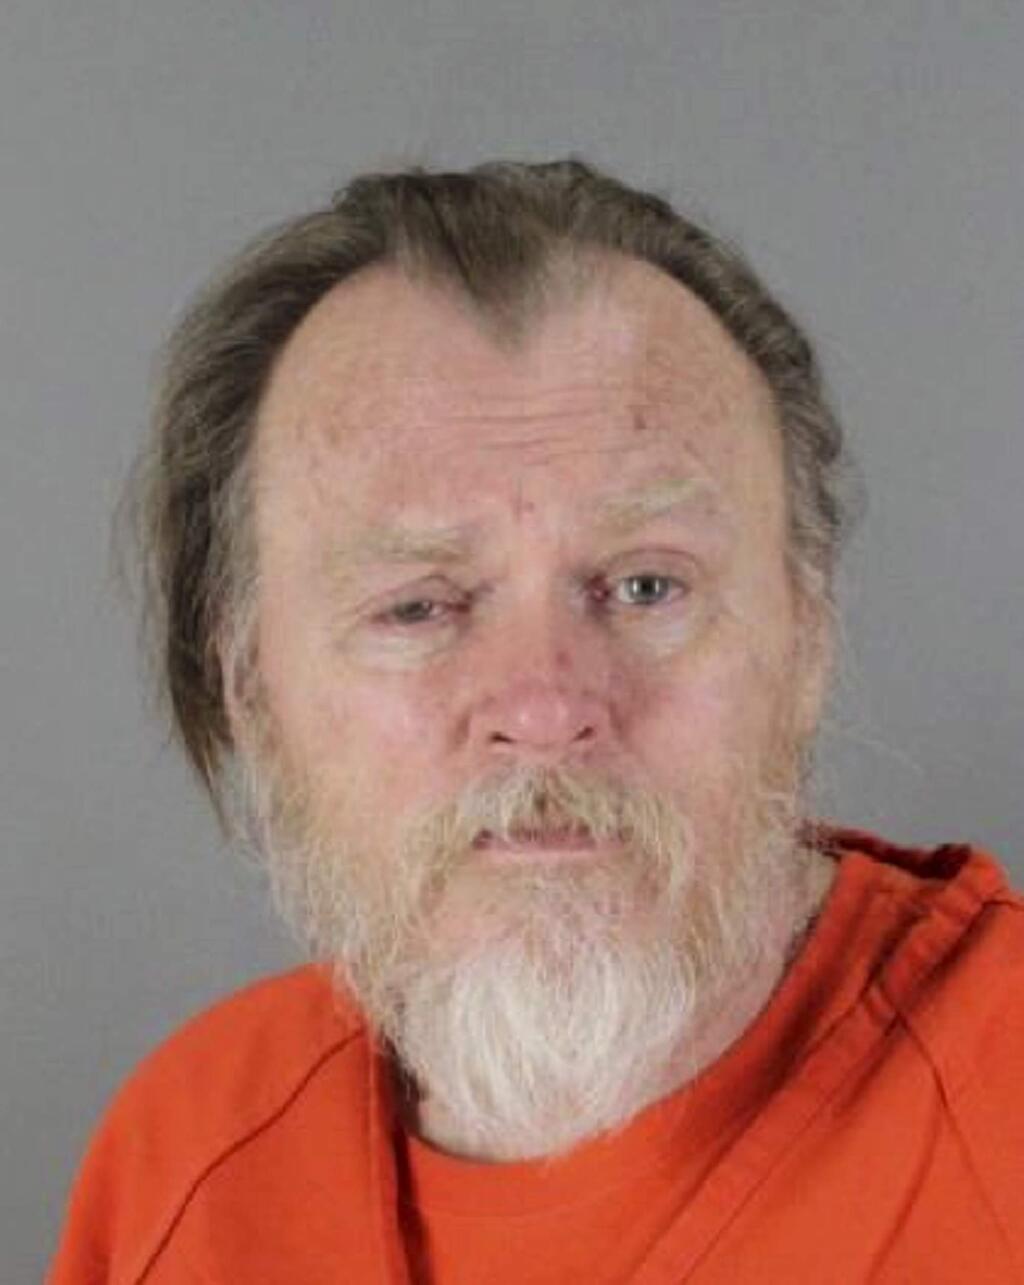 FILE - This undated file photo provided by the San Mateo County Sheriff's Office shows Rodney Halbower. A Northern California jury has started its deliberations in the murder trial of a career criminal authorities believe is the Gypsy Hill Killer. San Mateo County jurors started deliberating late Tuesday, Sept. 18, 2018, after eight days of testimony in Redwood City, about 25 miles (40 kilometers) south of San Francisco. Halbower is charged with raping and killing two teenage women in 1976 in the quiet suburbs just south of San Francisco. (San Mateo County Sheriff's Office via AP, File)